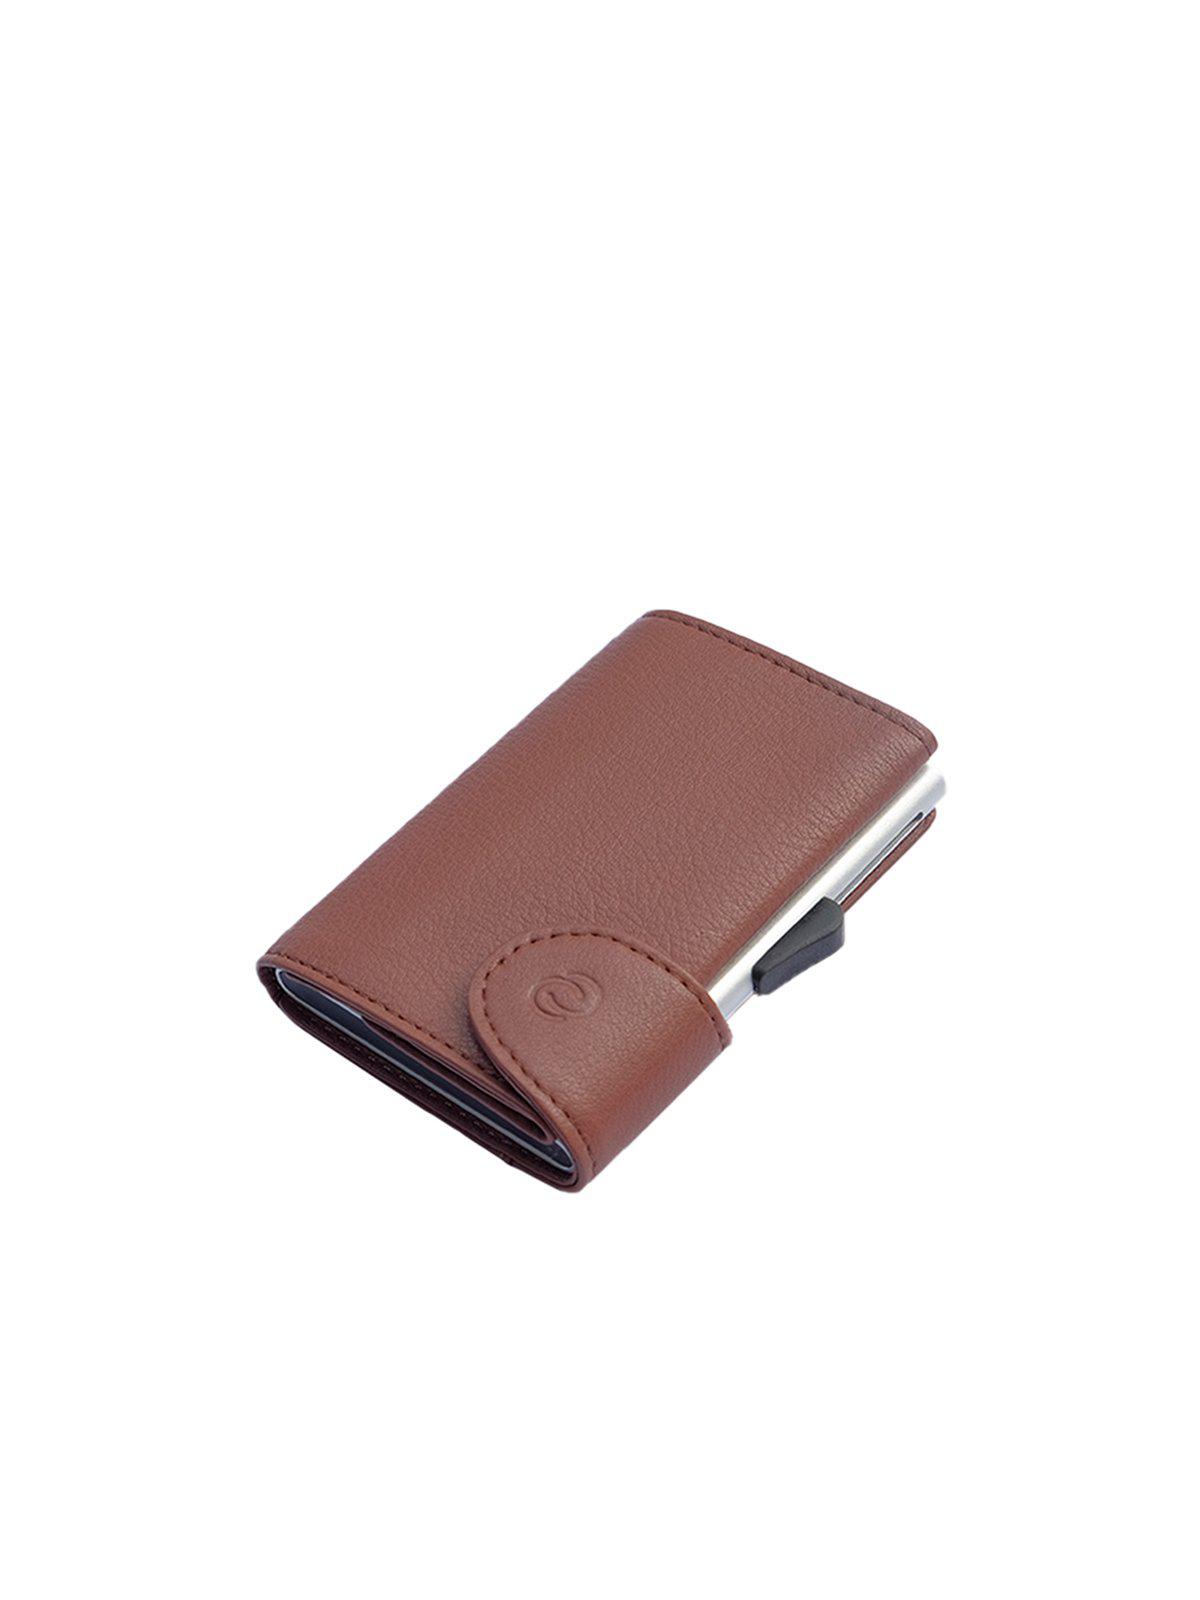 C-Secure Italian Leather RFID Wallet Bruciato - MORE by Morello Indonesia